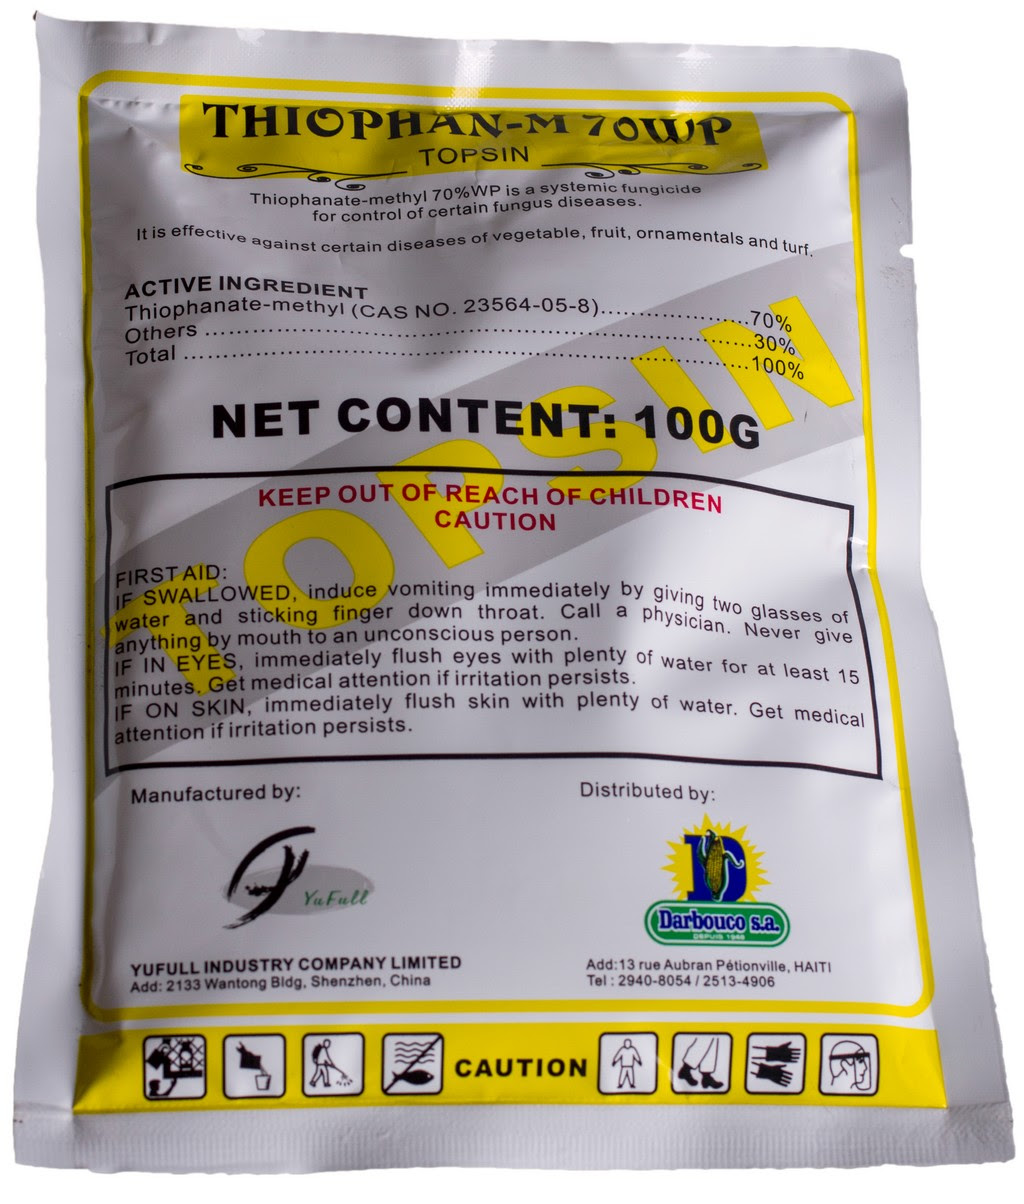 33 Thiophanate Methyl Fungicide Label Best Labels Ideas 2020